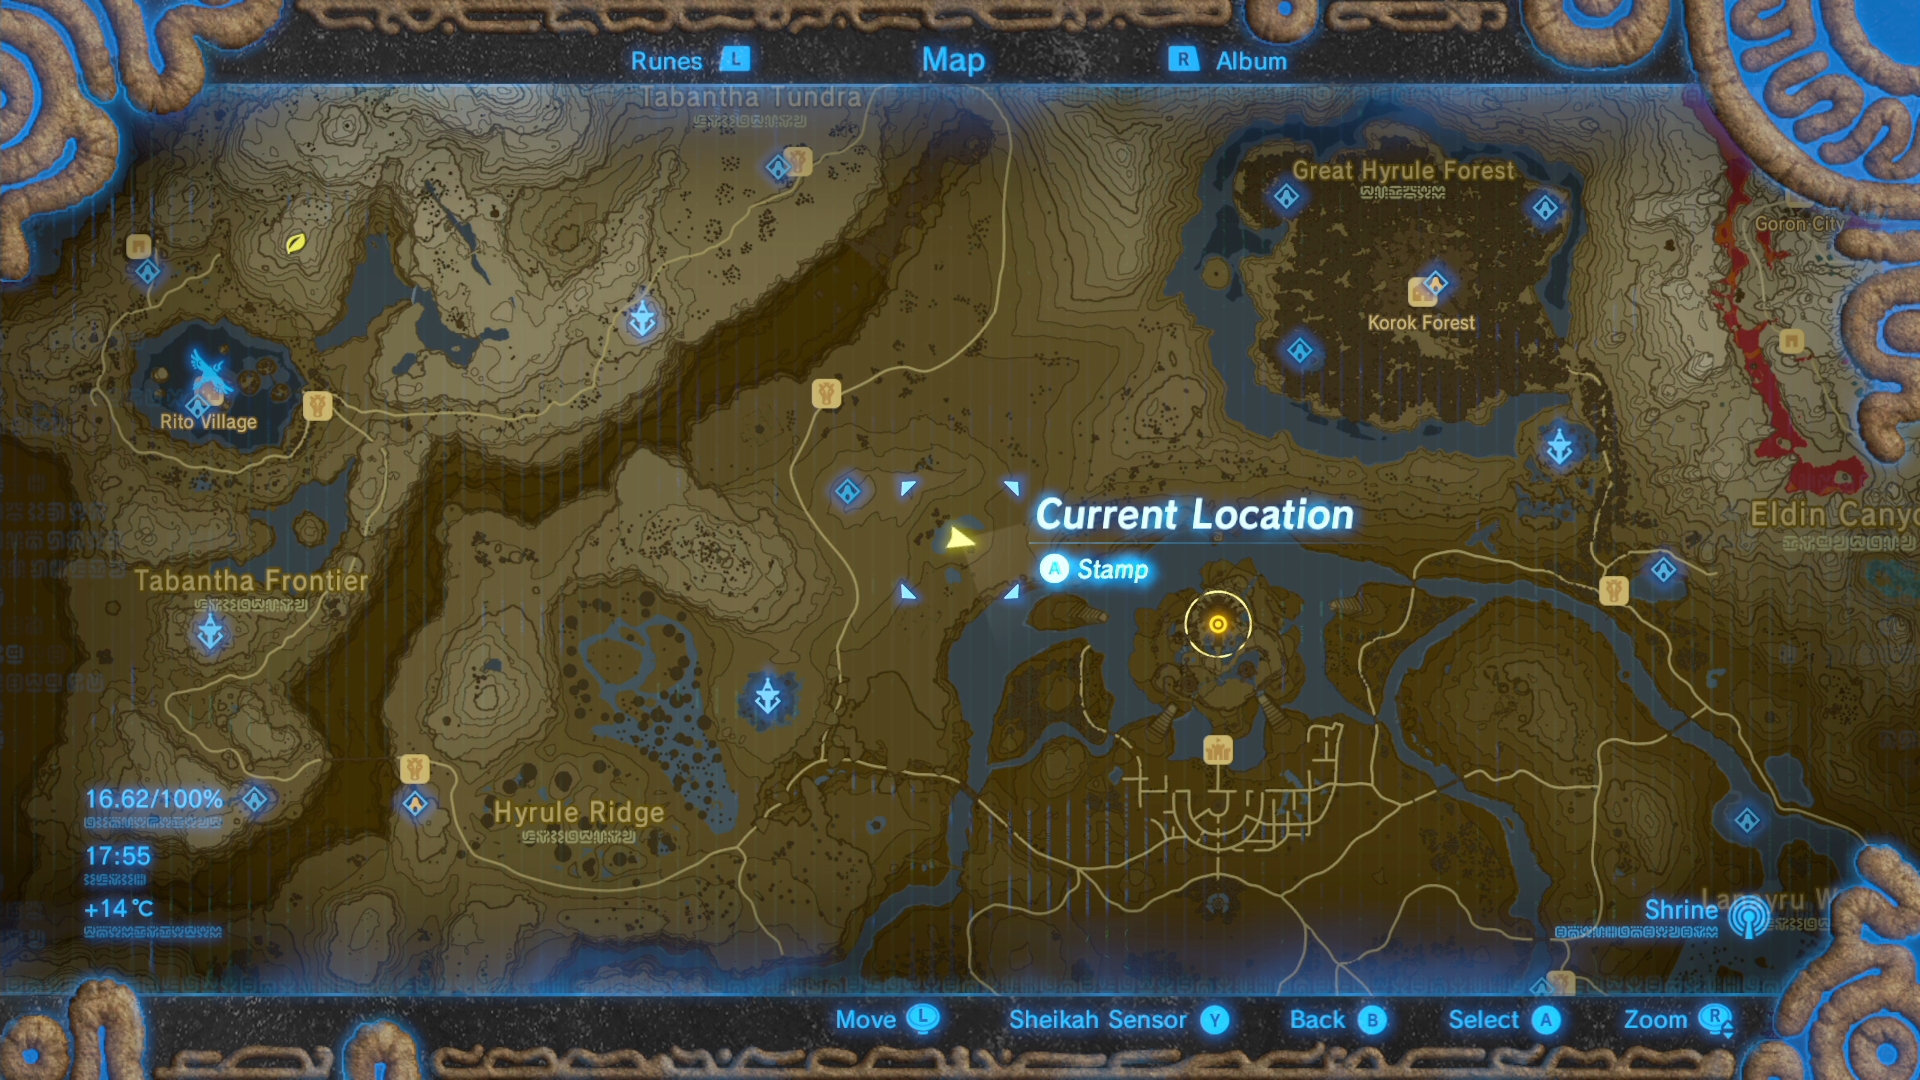 Captured Memories: How to find all memory locations in Breath of